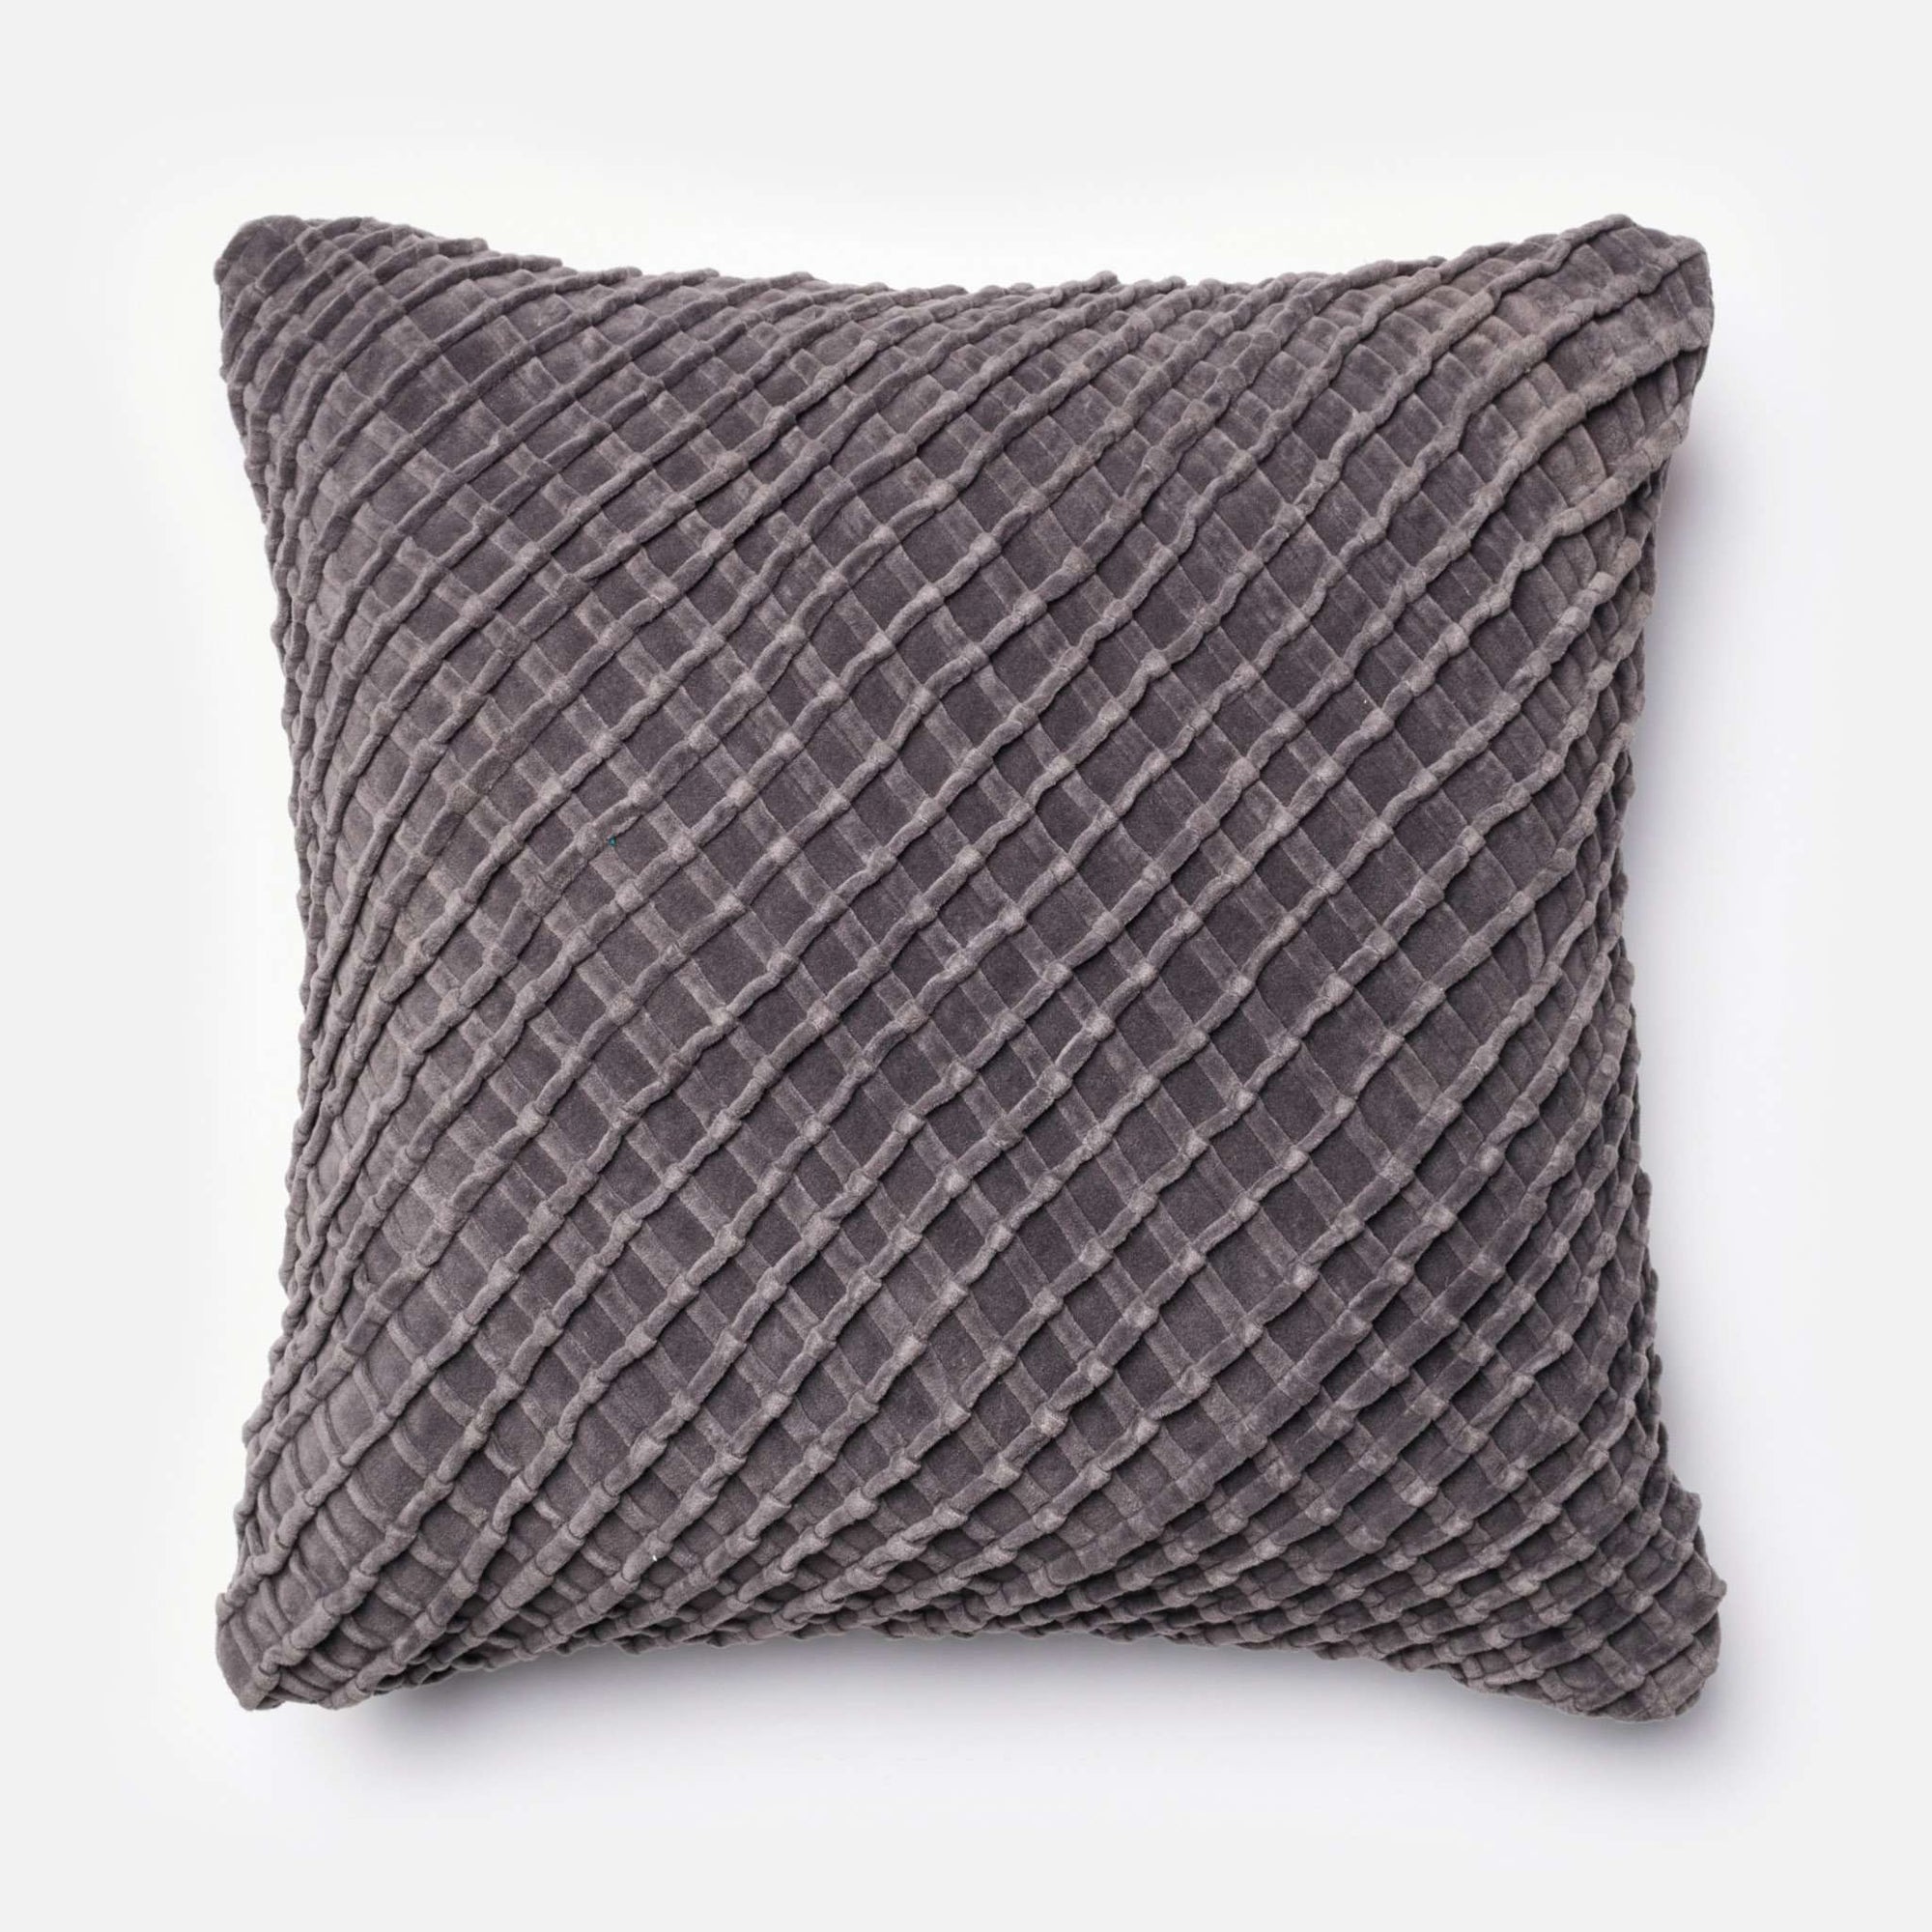 Charcoal Square P0125 Pillow - Rug & Home